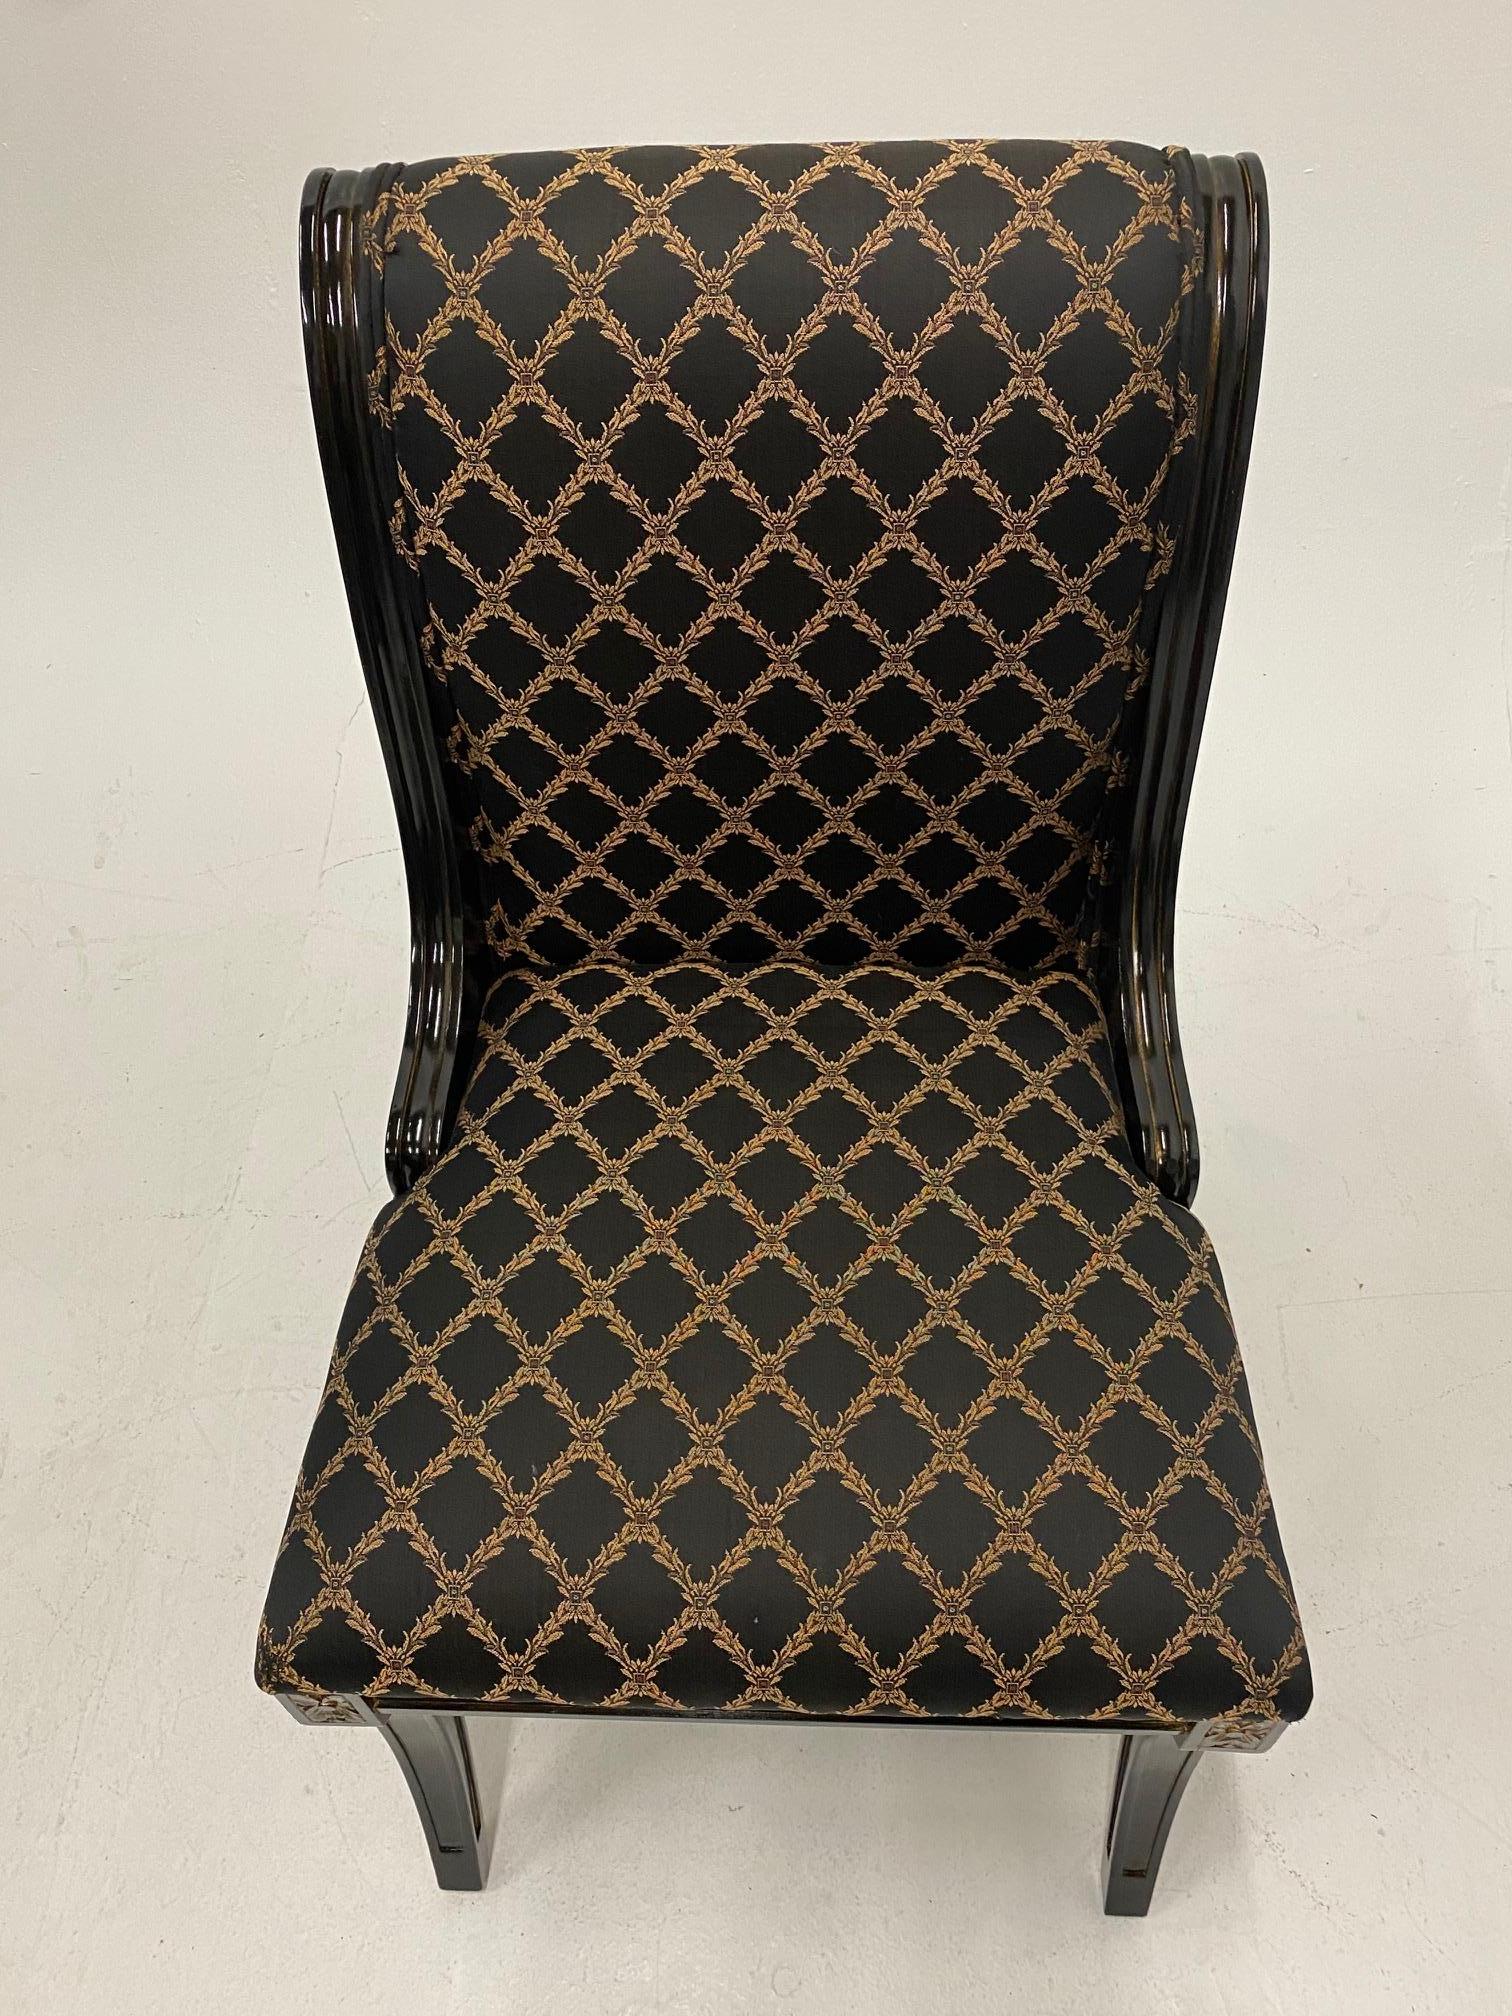 A glam set of 4 side dining chairs having Hollywood Regency flair with black and gold frames and sophisticated coordinating black and gold lattice inspired upholstery.